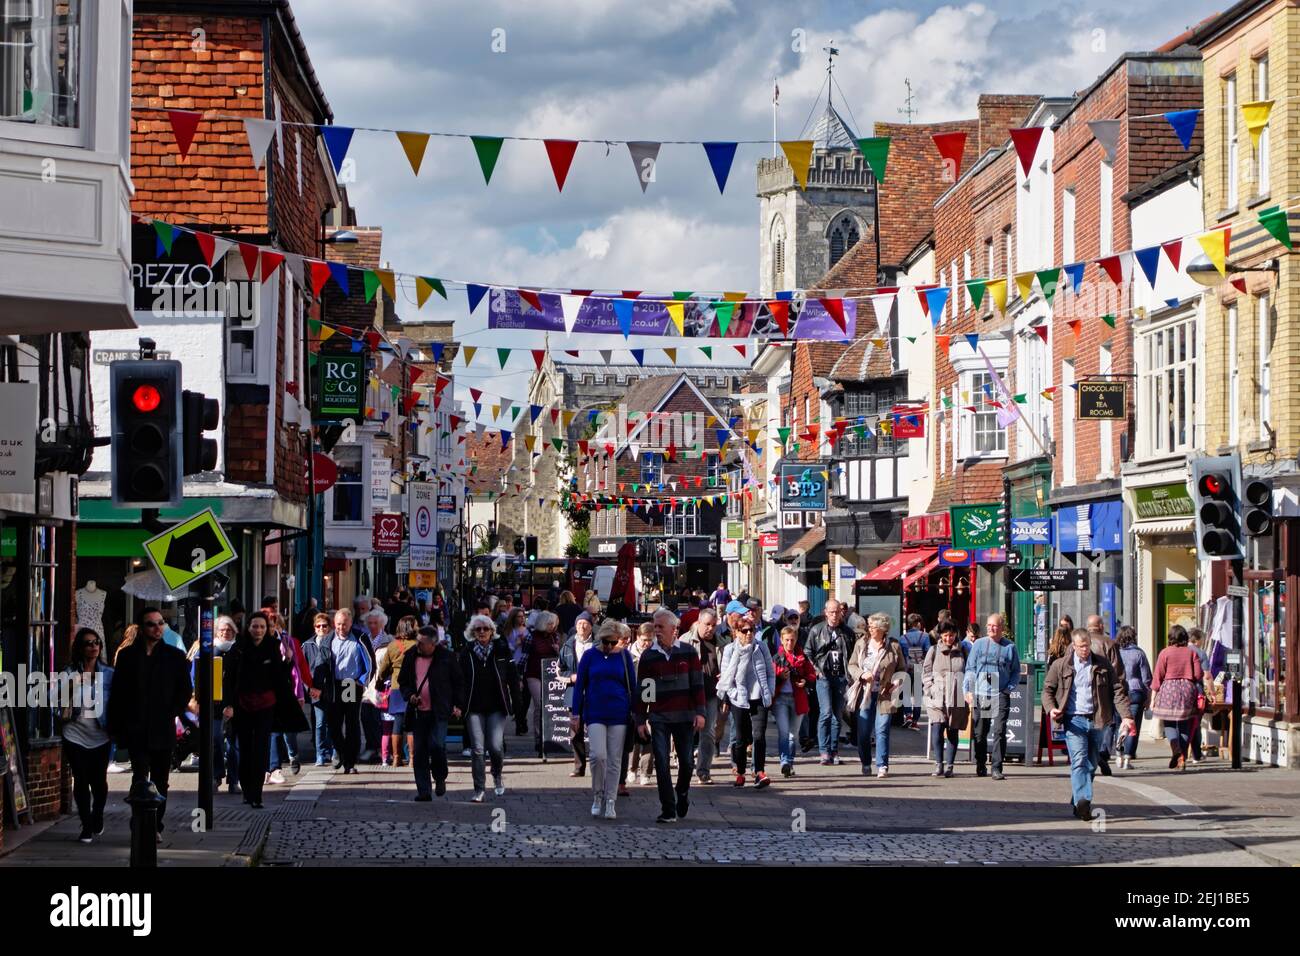 Salisbury, Wiltshire, UK - May 13 2017: The High Street in Salisbury, Wiltshire, England, United Kingdom, very busy with shoppers and tourists Stock Photo